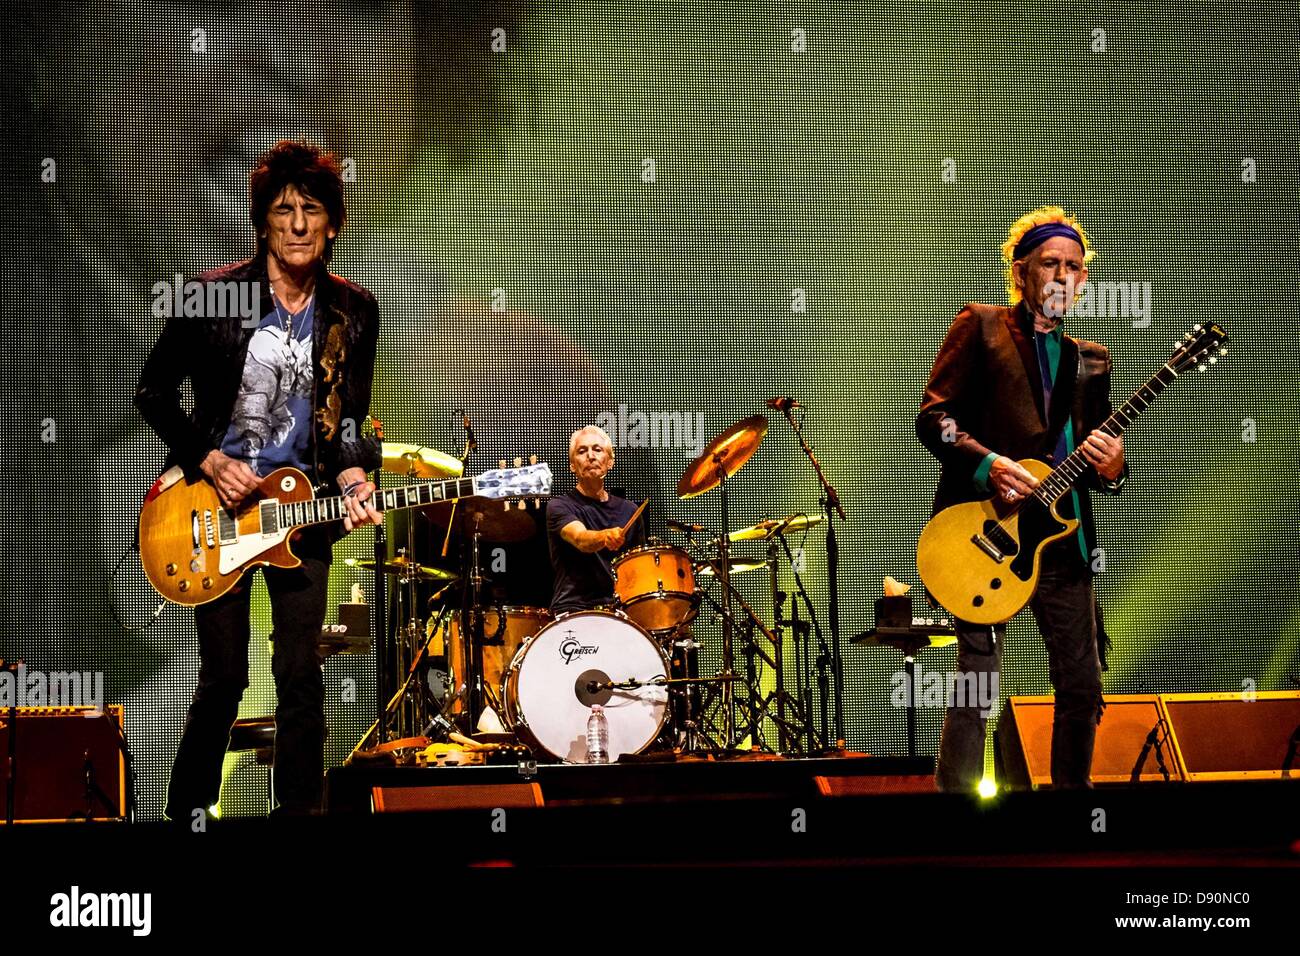 Toronto, Ontario, Canada. June 6, 2013. RON WOOD, CHALIE WATTS and KEITH RICHARDS, of The Rolling Stones, on tour in their 50th year of playing as a band, work their magic at the Air Canada Centre Credit:  ZUMA Press, Inc./Alamy Live News Stock Photo